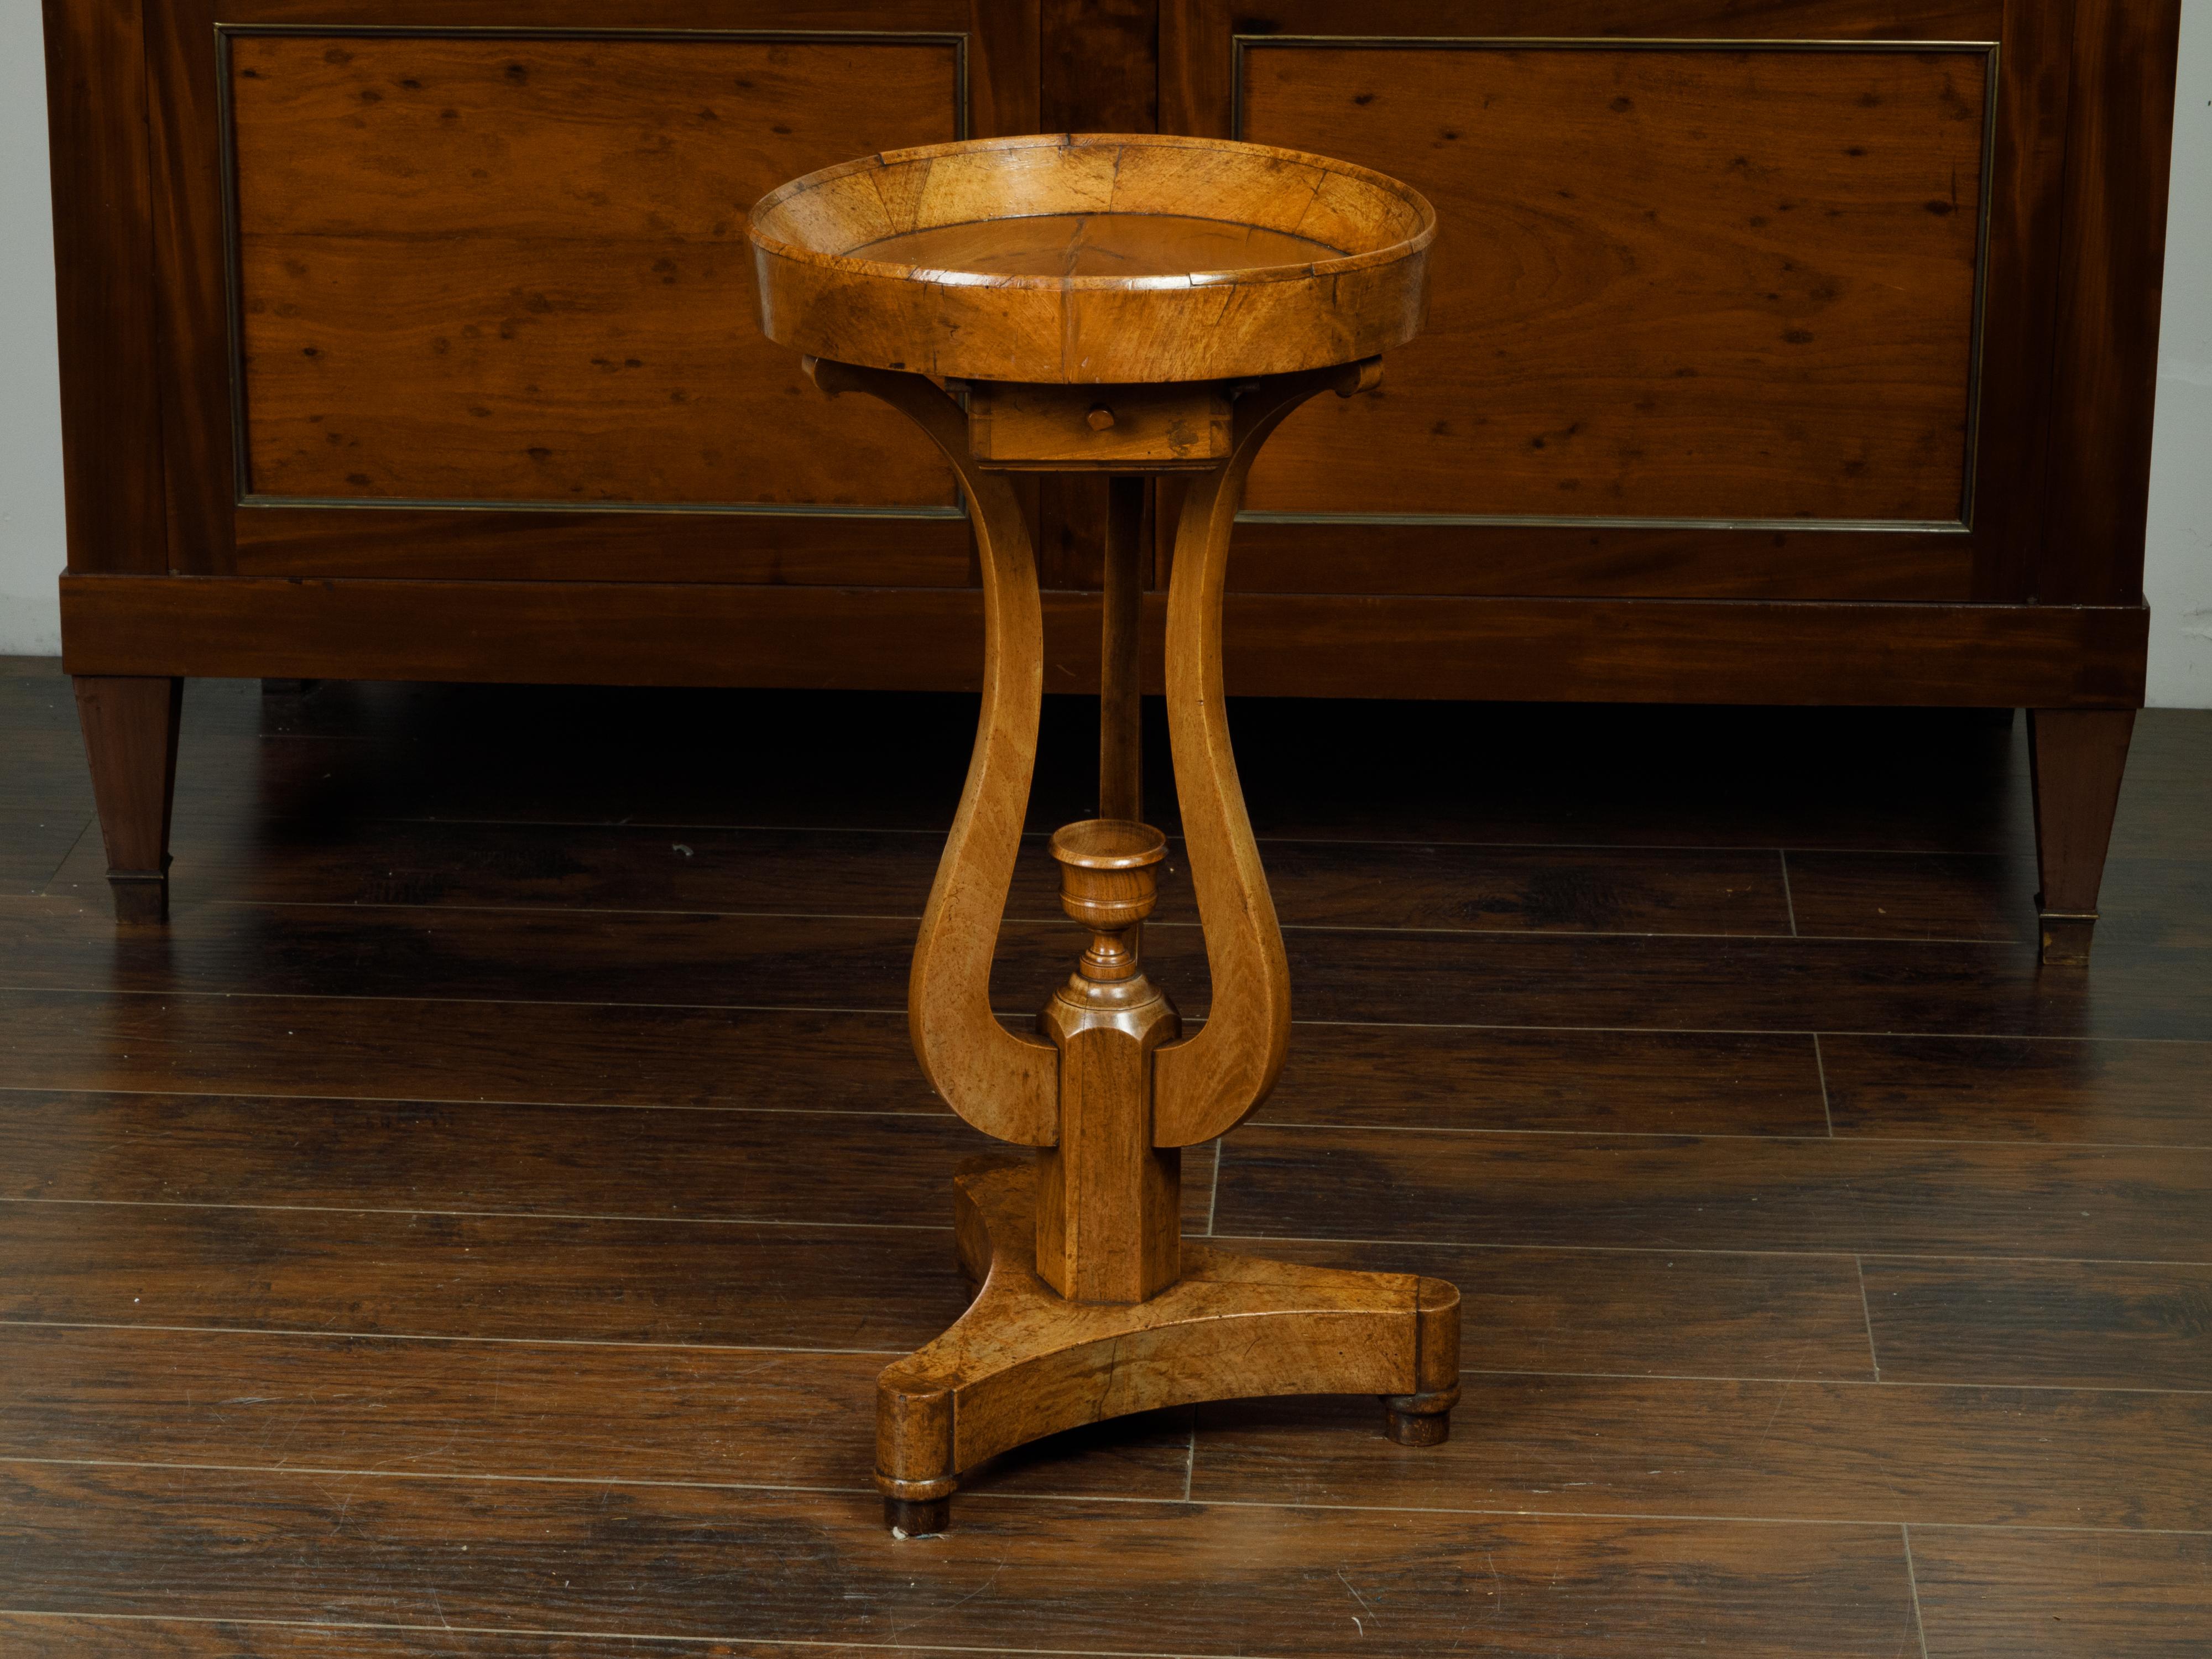 19th Century Austrian Biedermeier Period 1840s Guéridon Table with Tray Top and Lyre Base